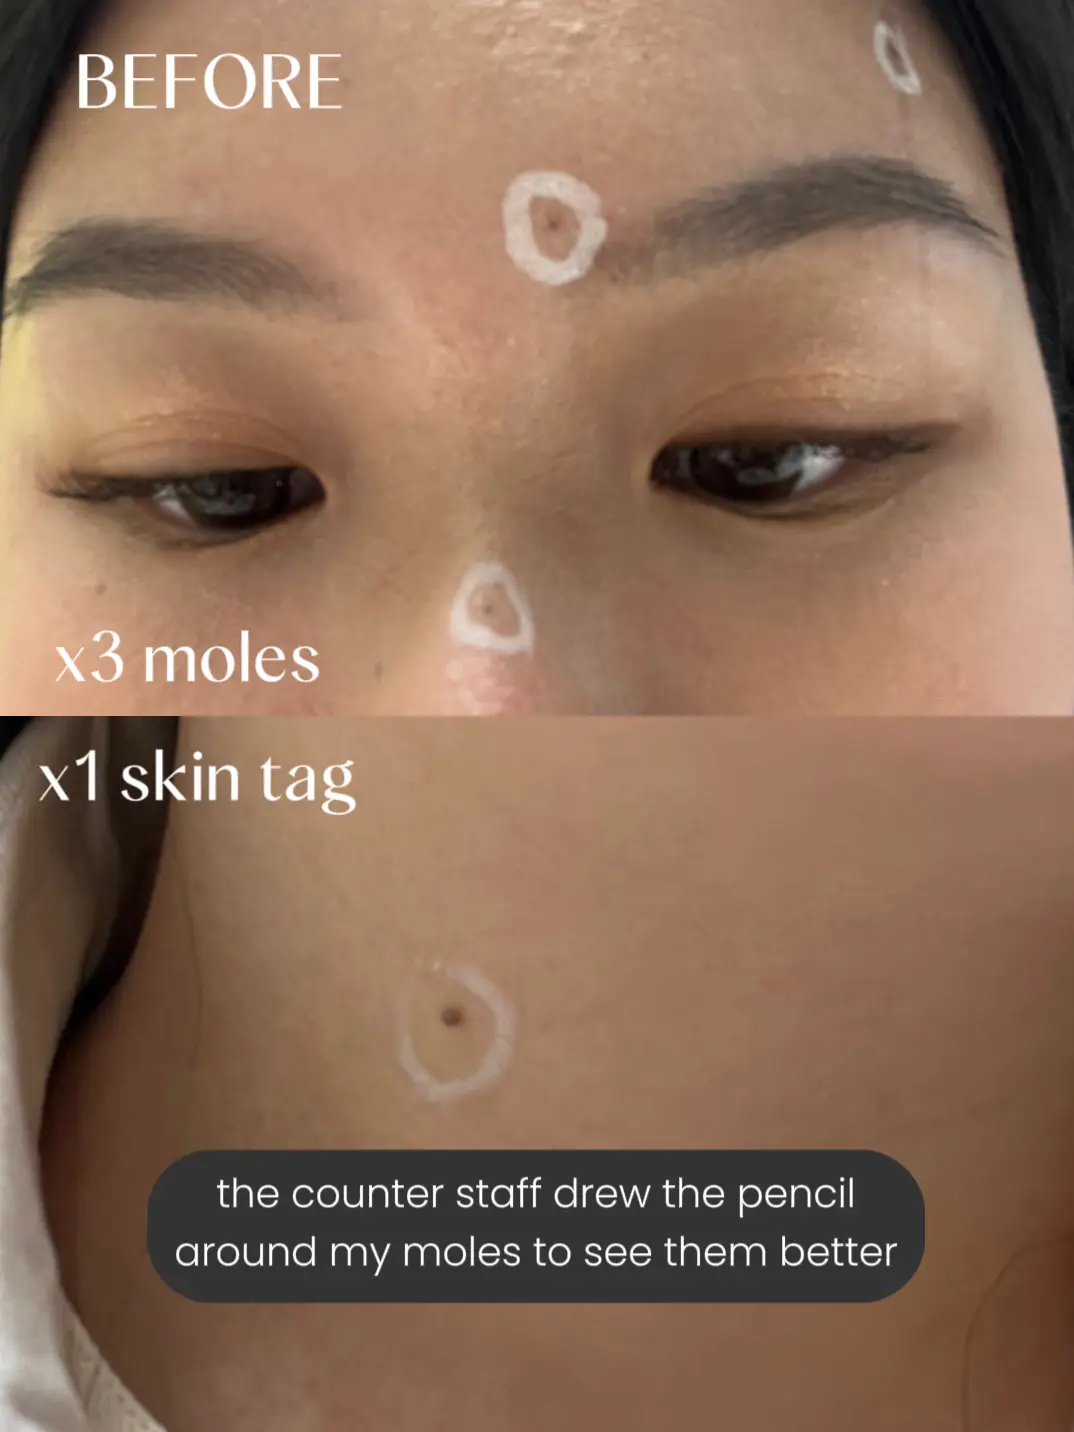 All you need to know about mole removal in Korea 🇰🇷's images(1)